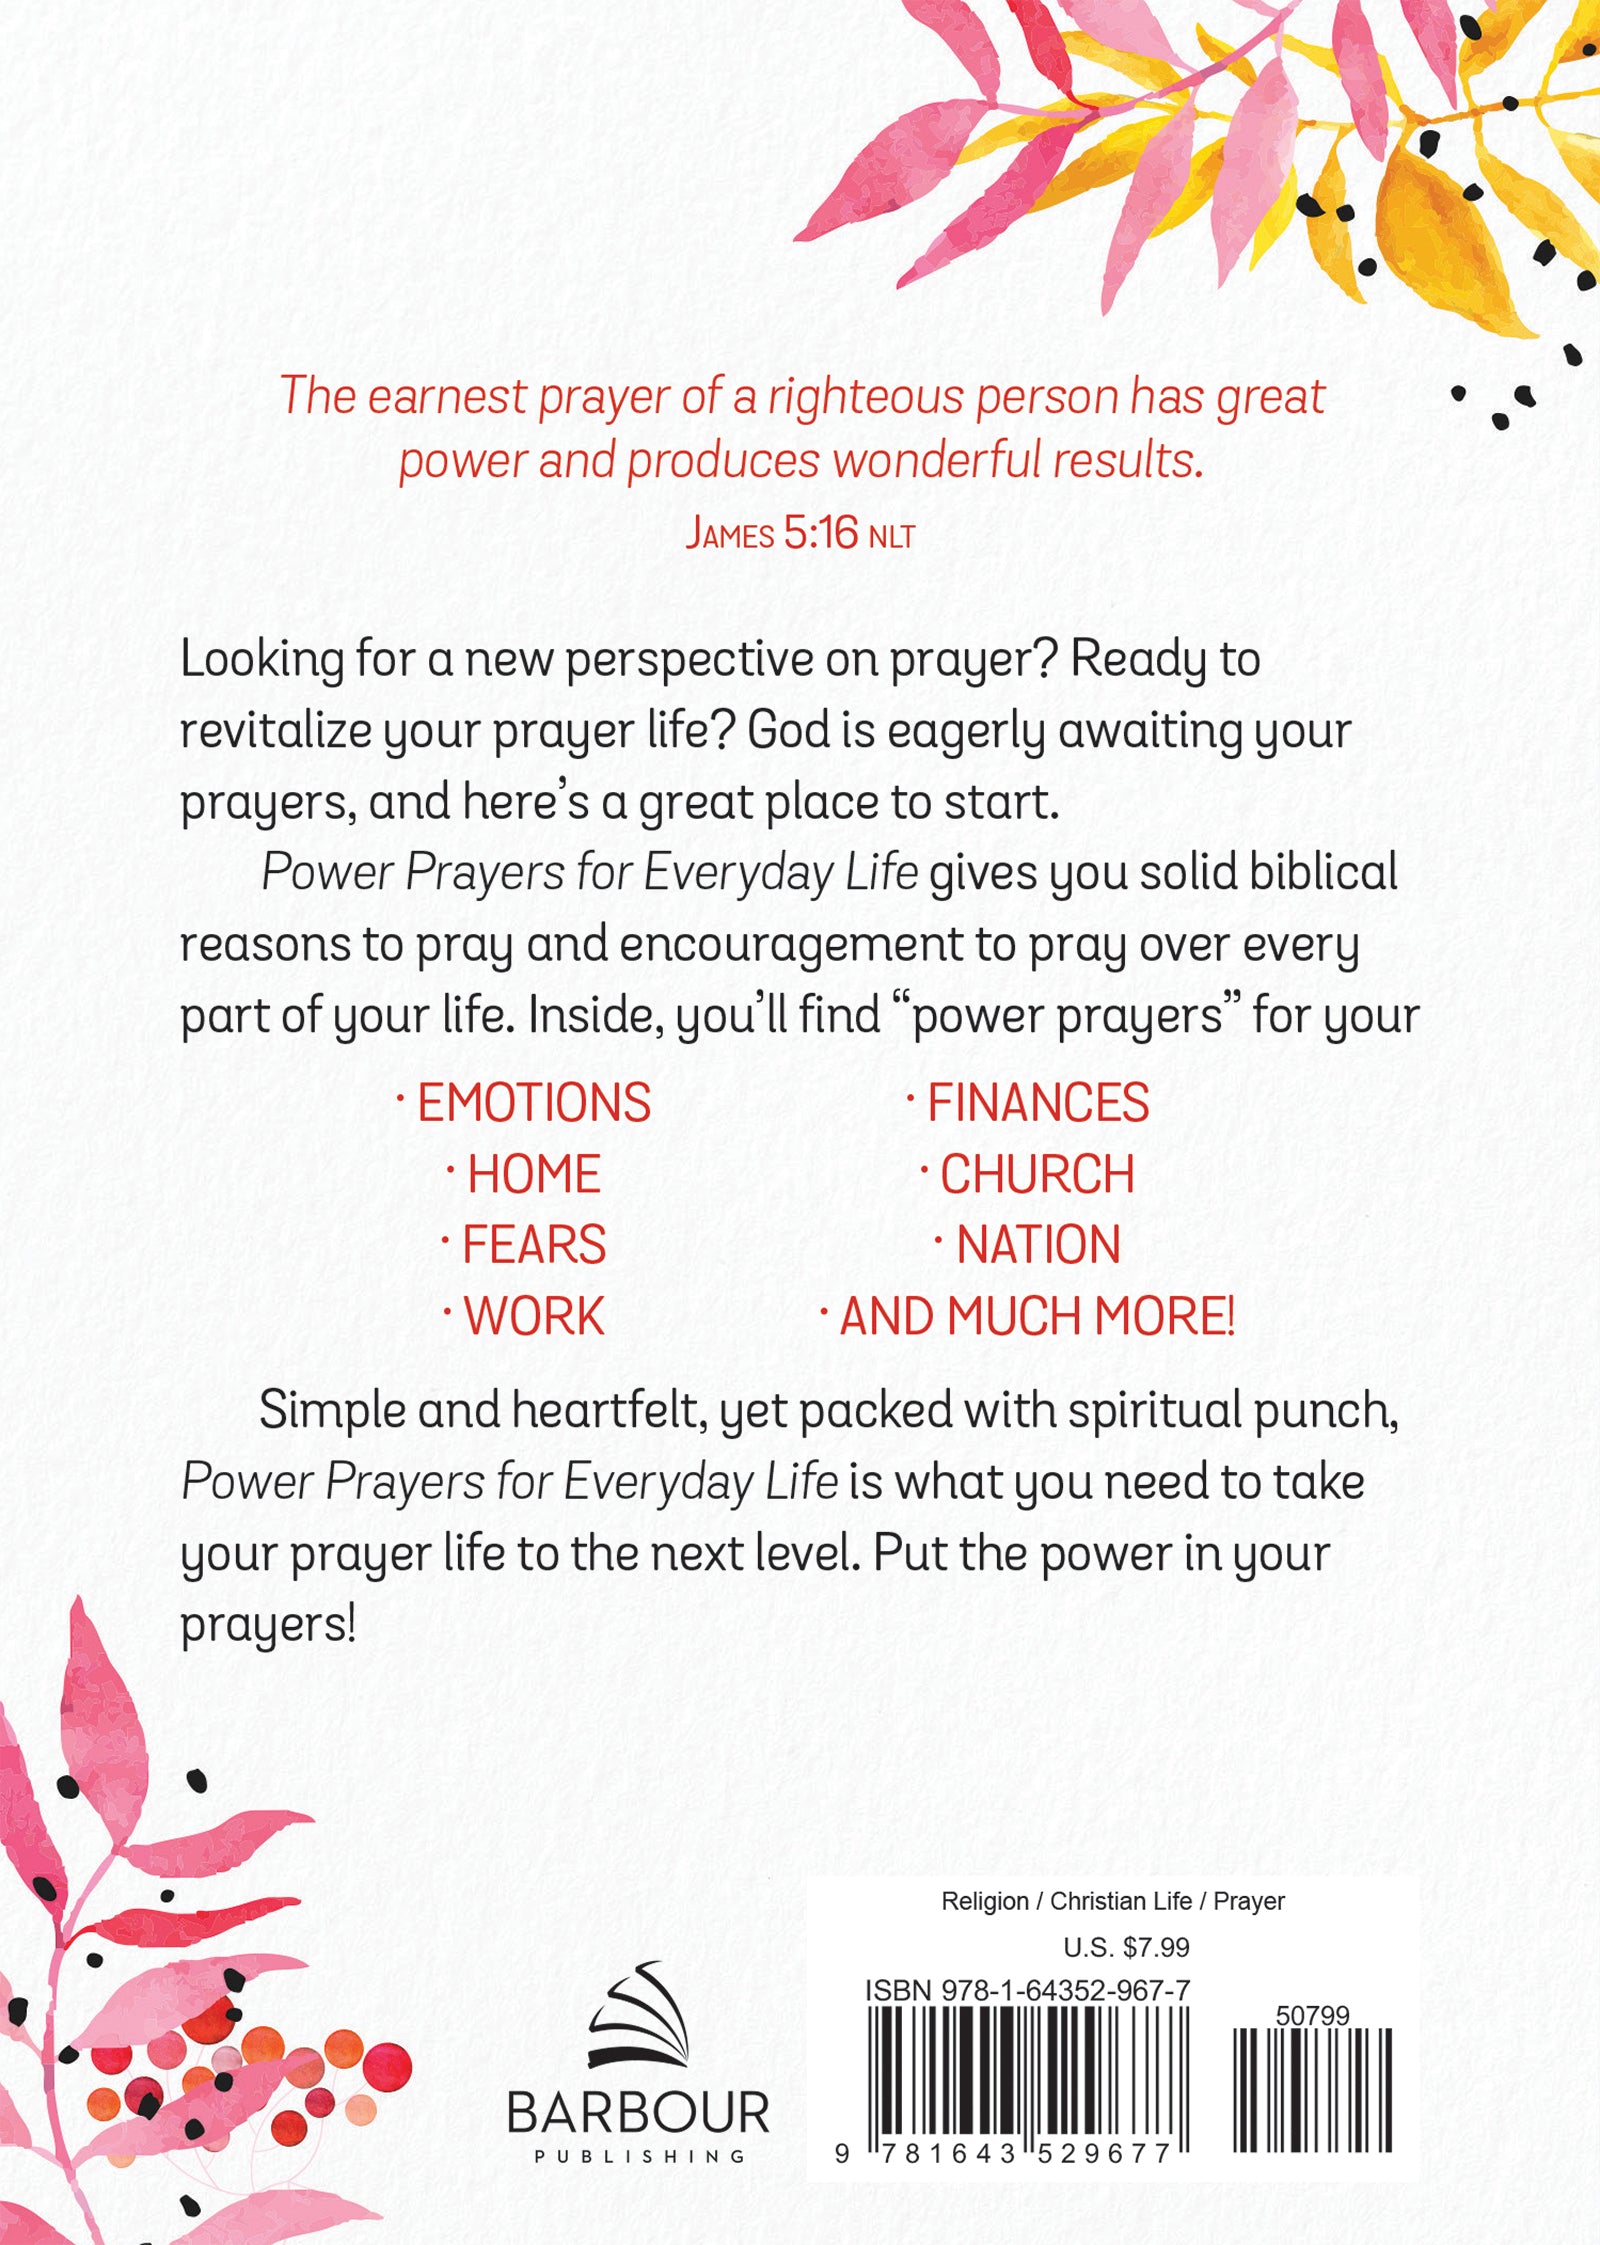 Power Prayers for Everyday Life - The Christian Gift Company